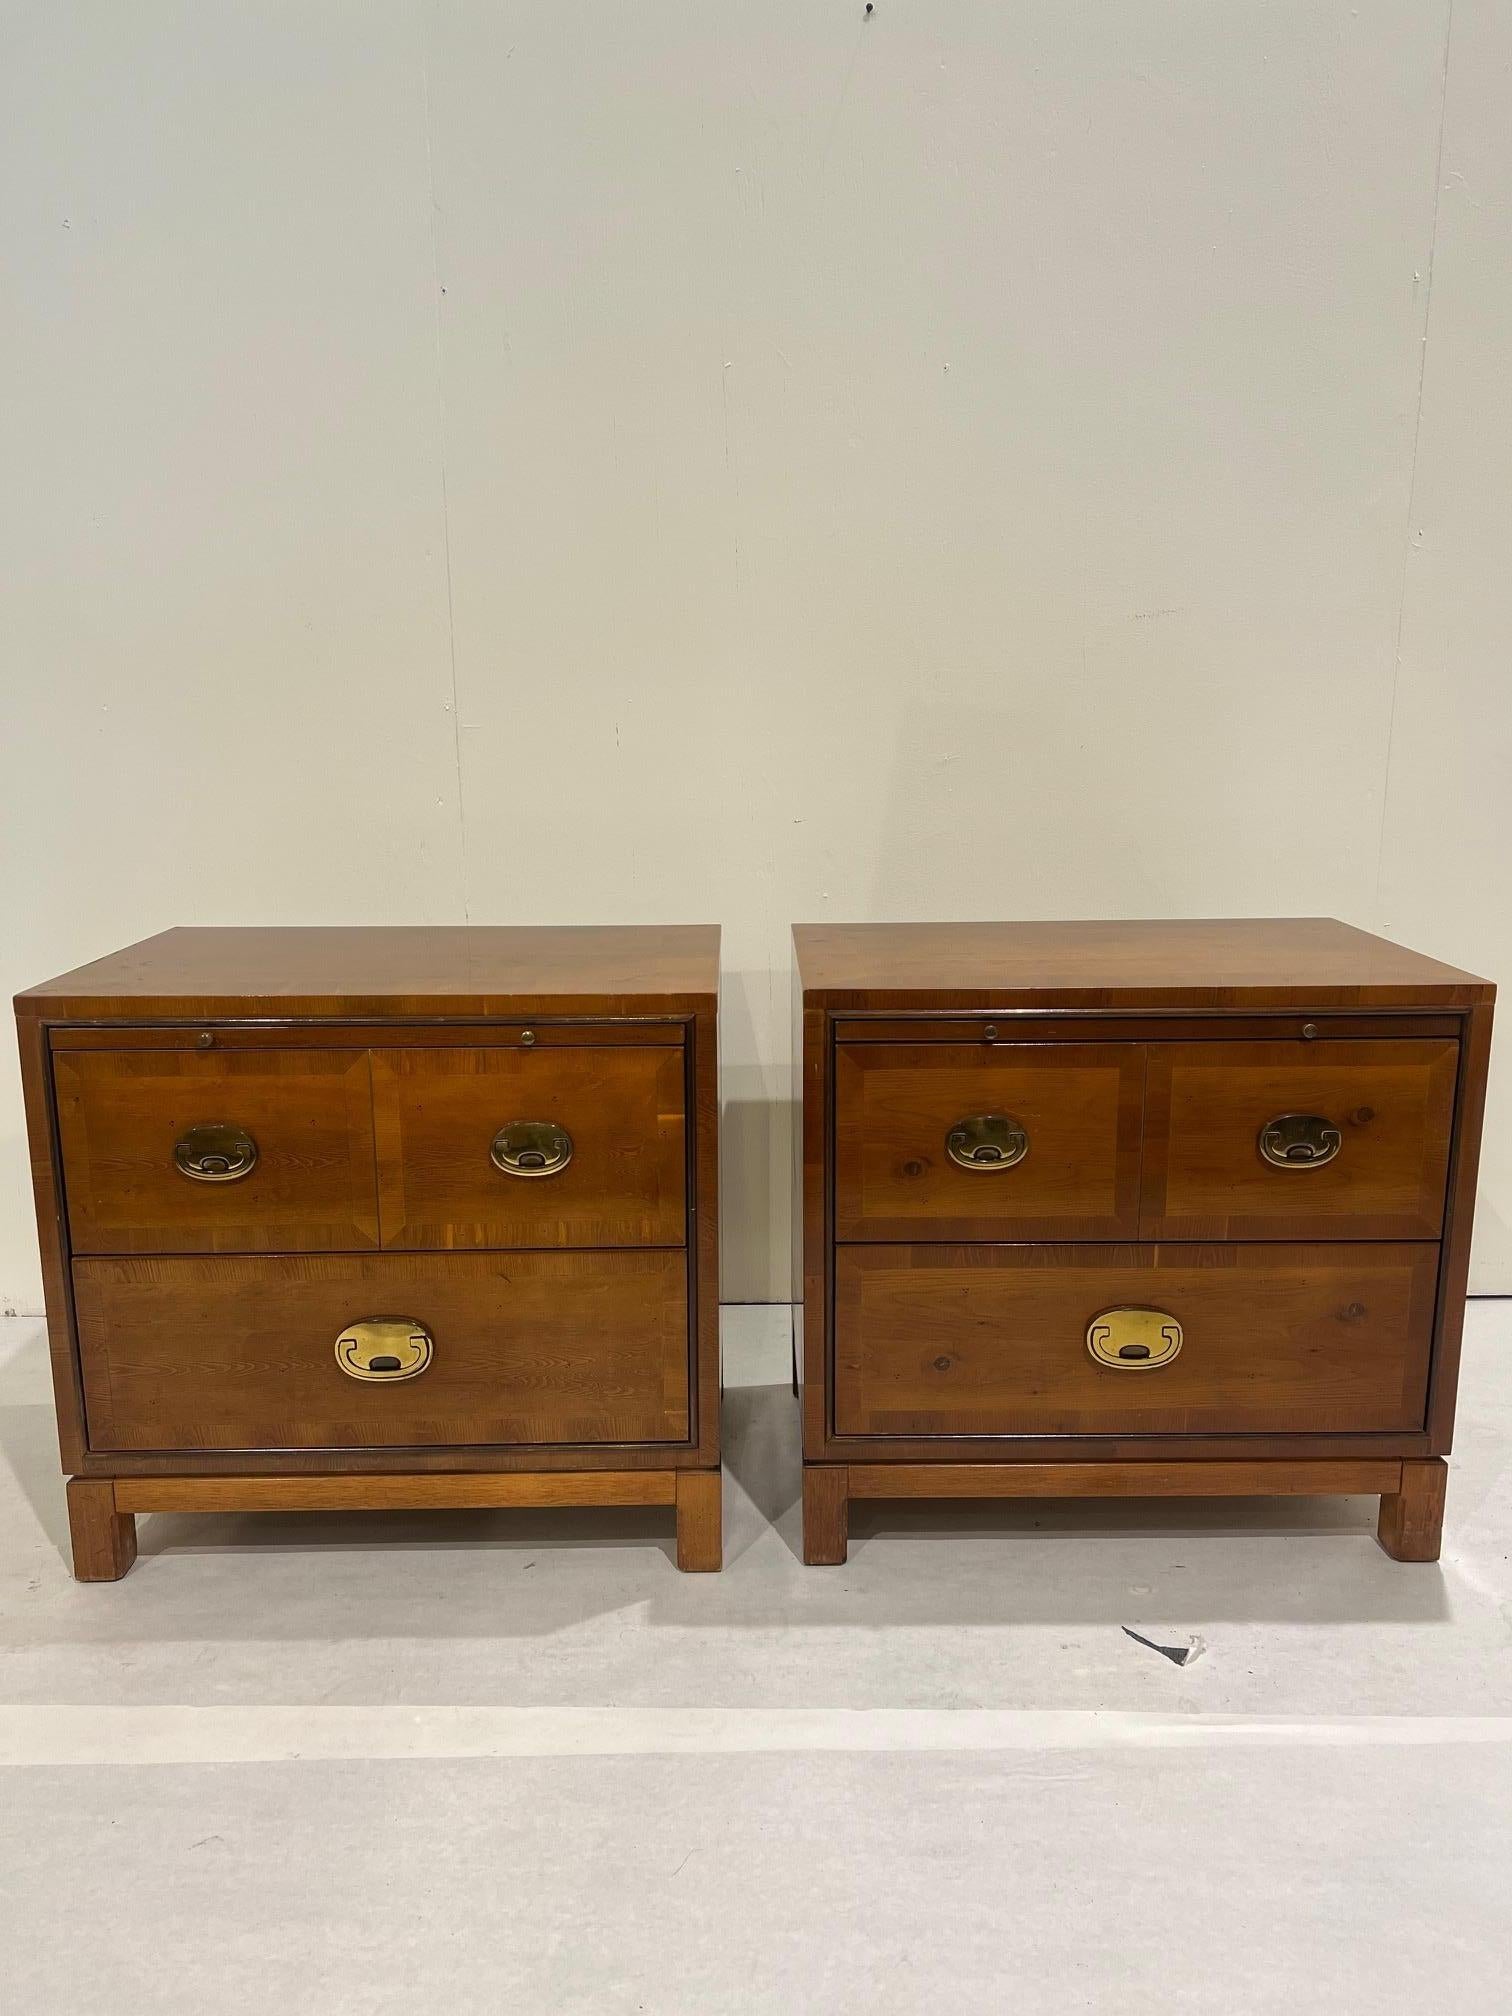 Mid-Century Modern side table sized chest of drawers with gold hardware These are very well made, they are oak and adorned with simple gold hardware sturdy construction.